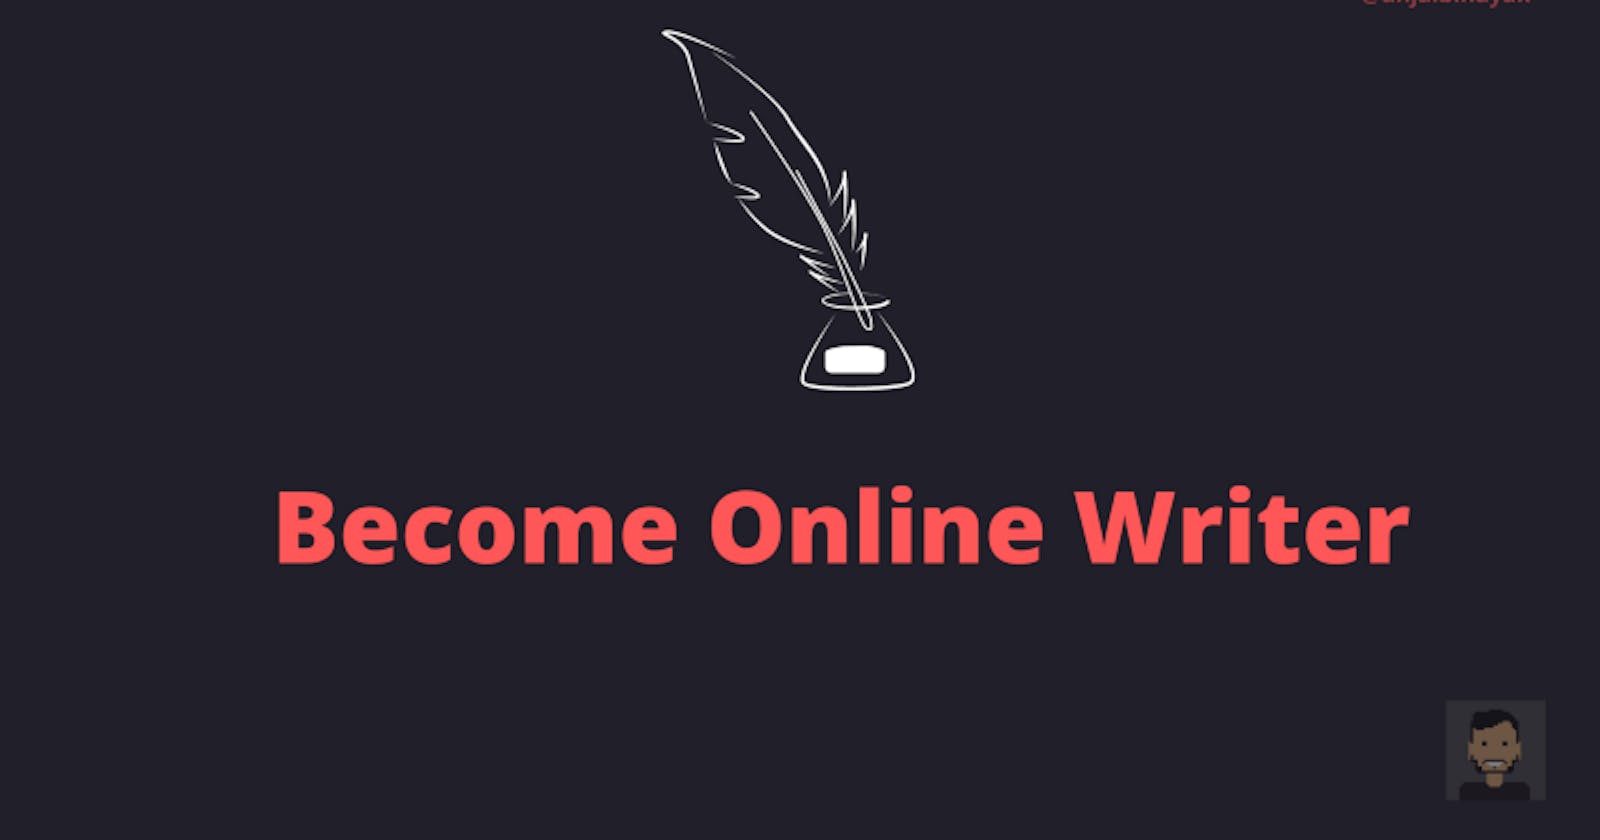 5 Tips for Becoming Effective Online Writer in 2022